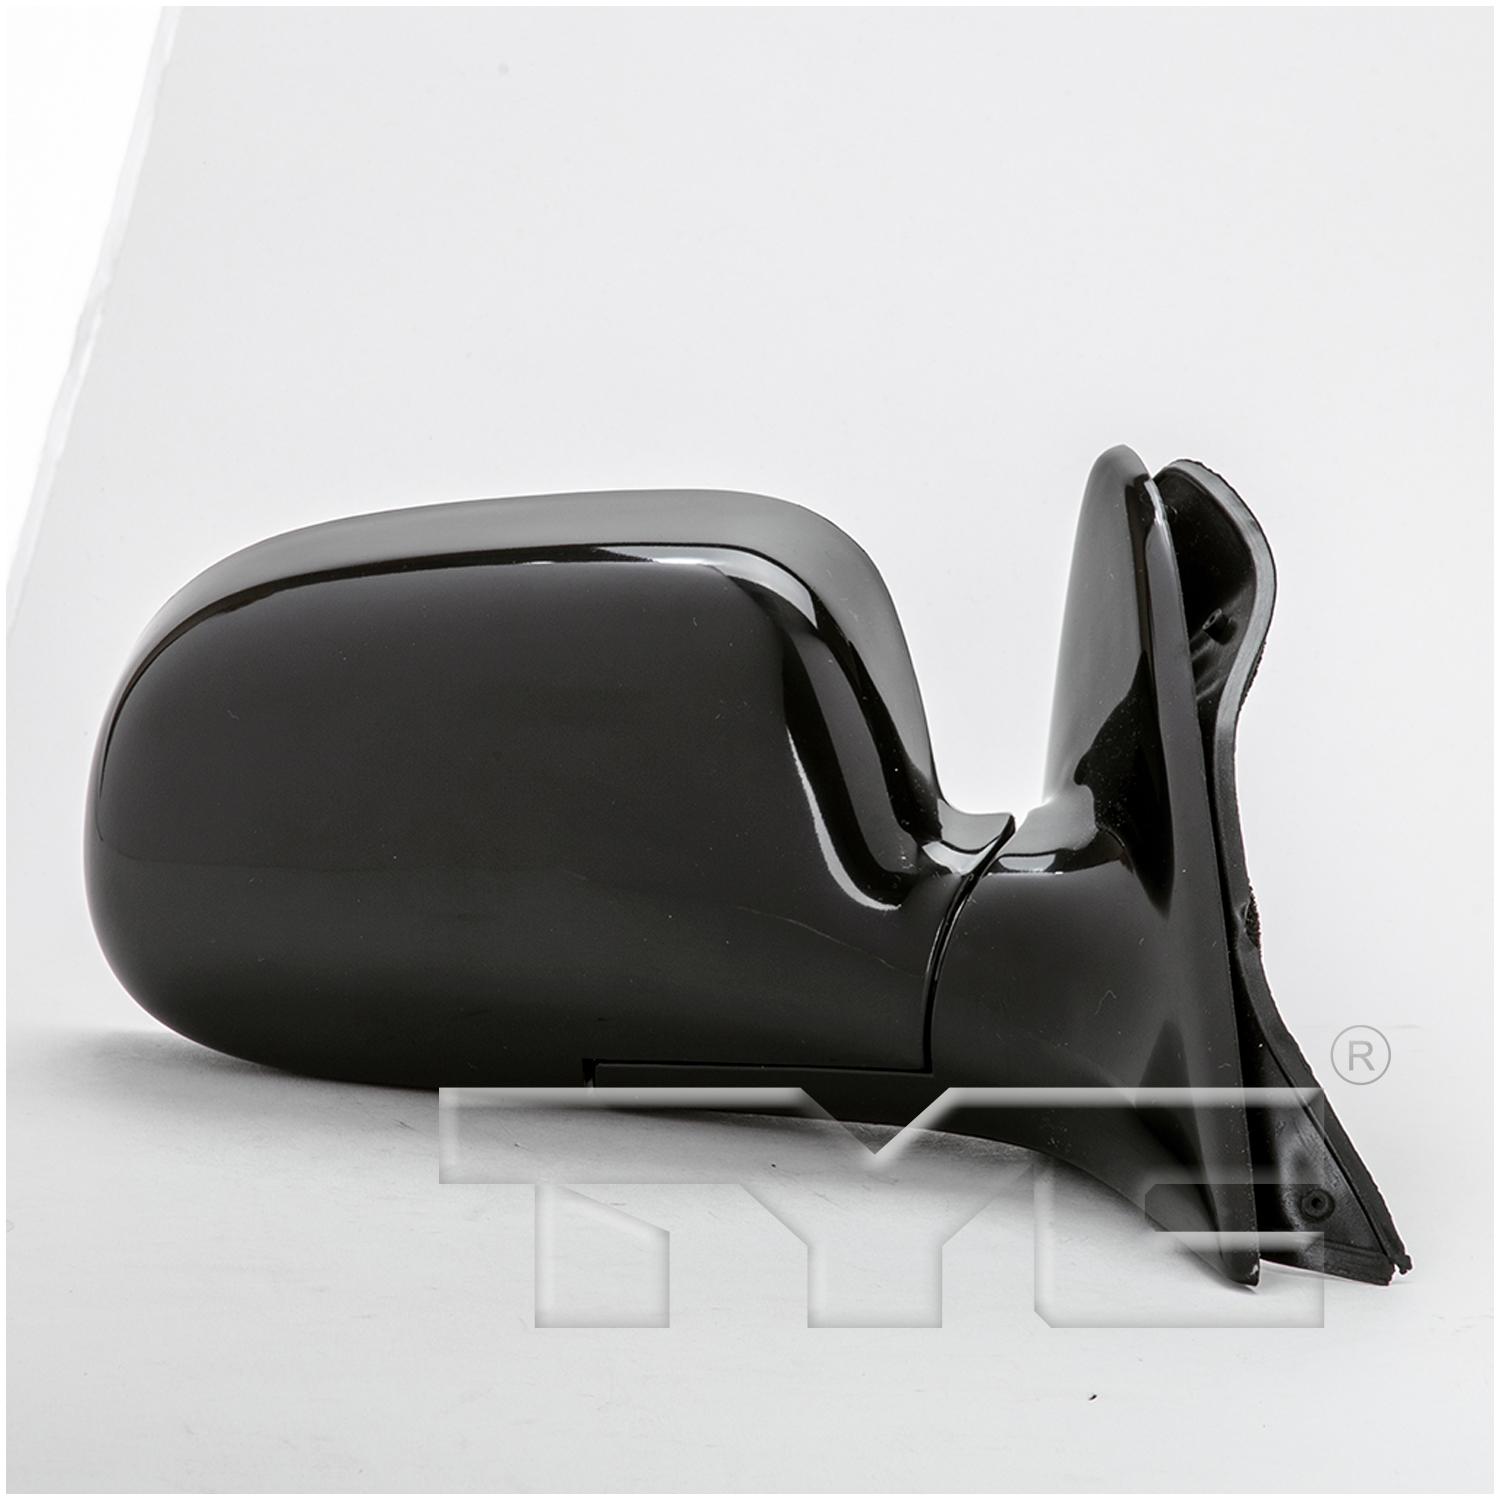 Aftermarket MIRRORS for TOYOTA - COROLLA, COROLLA,93-97,RT Mirror outside rear view